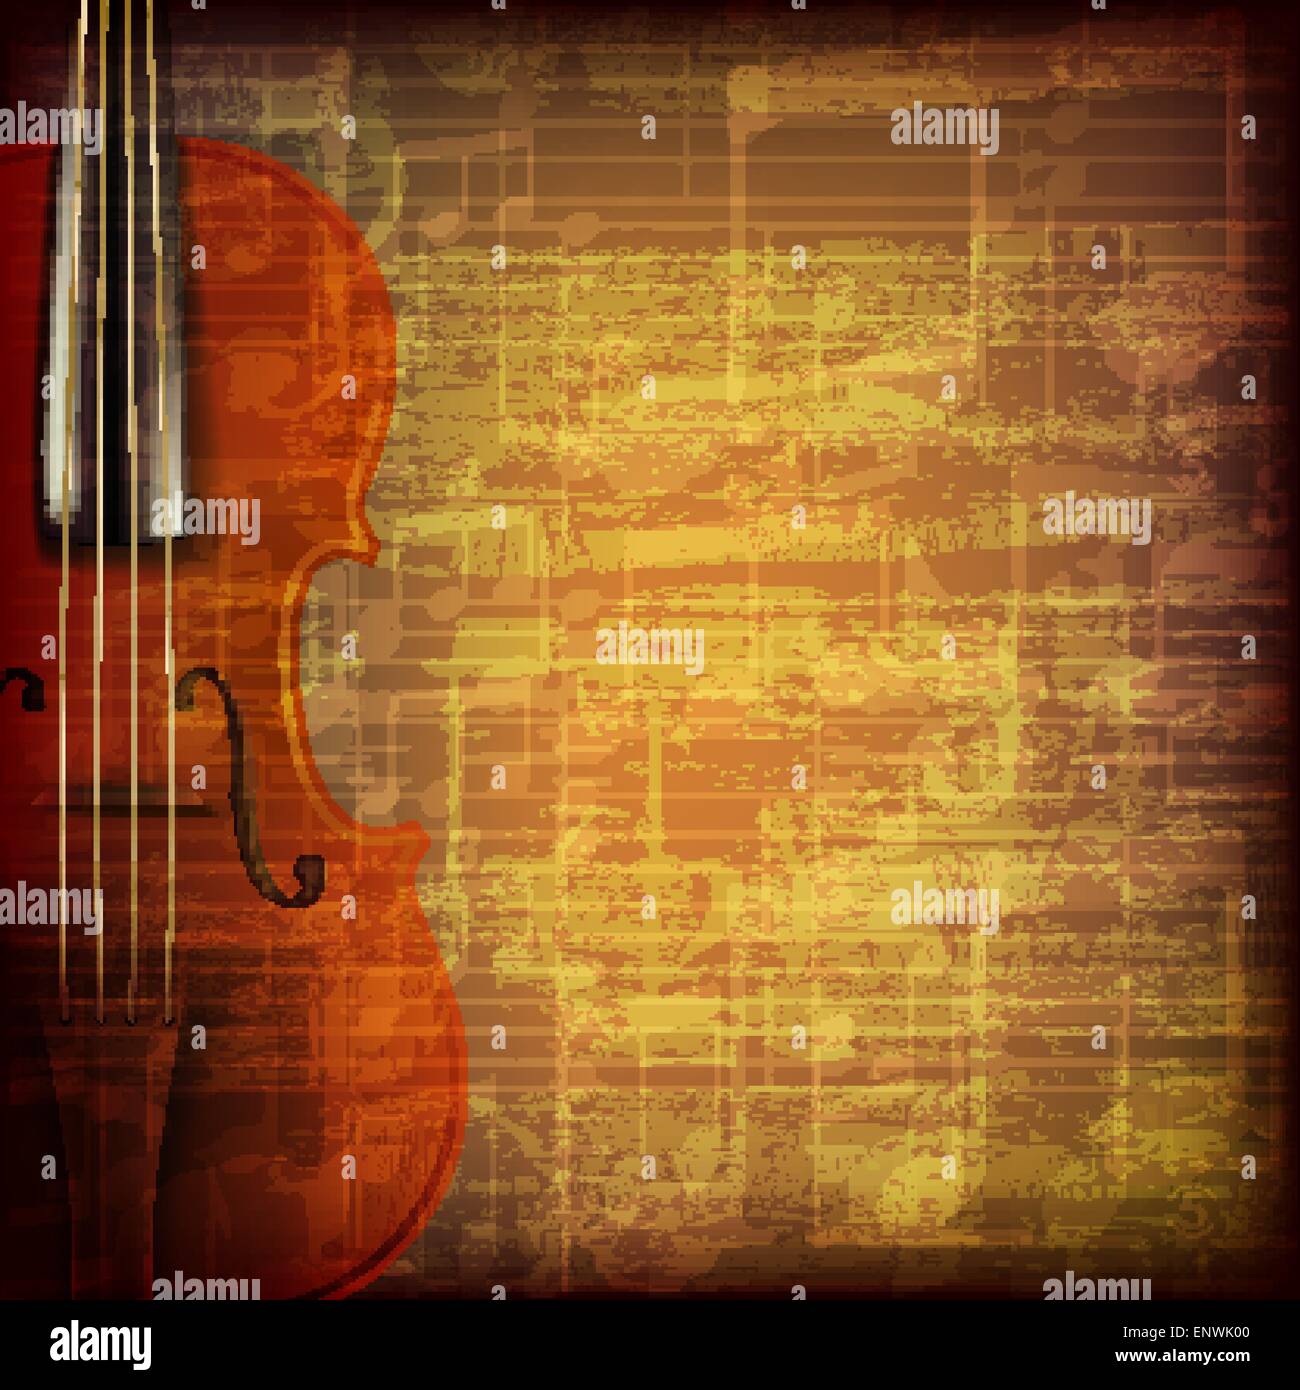 abstract grunge brown cracked music symbols vintage background with violin Stock Vector